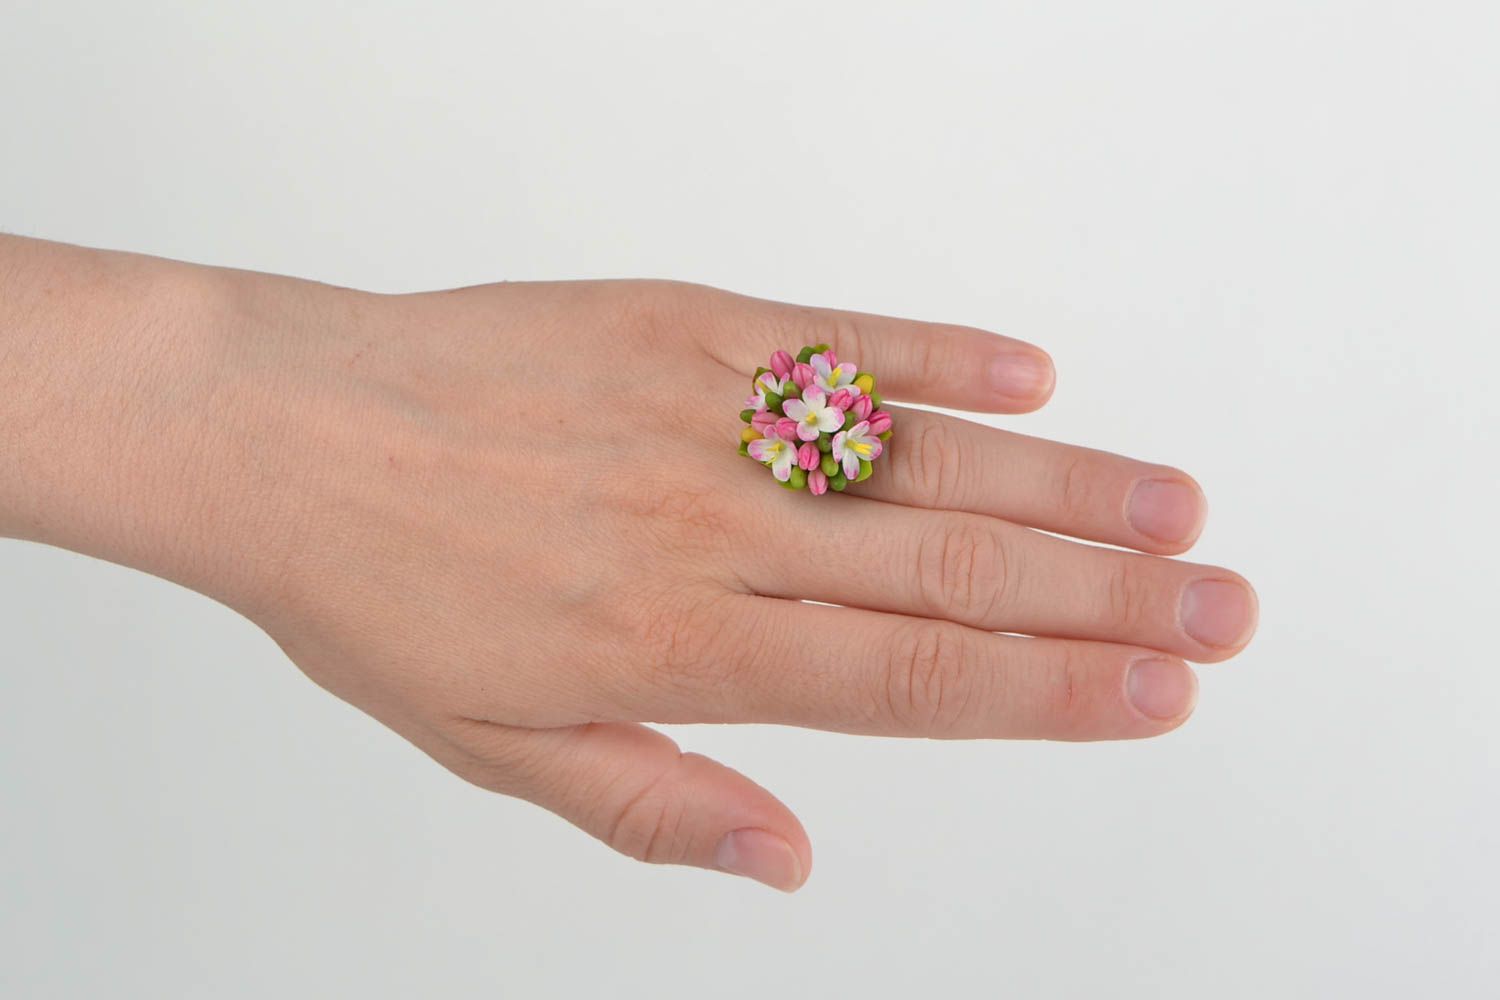 Beautiful ring made of cold porcelain with flowers handmade designer jewelry photo 1